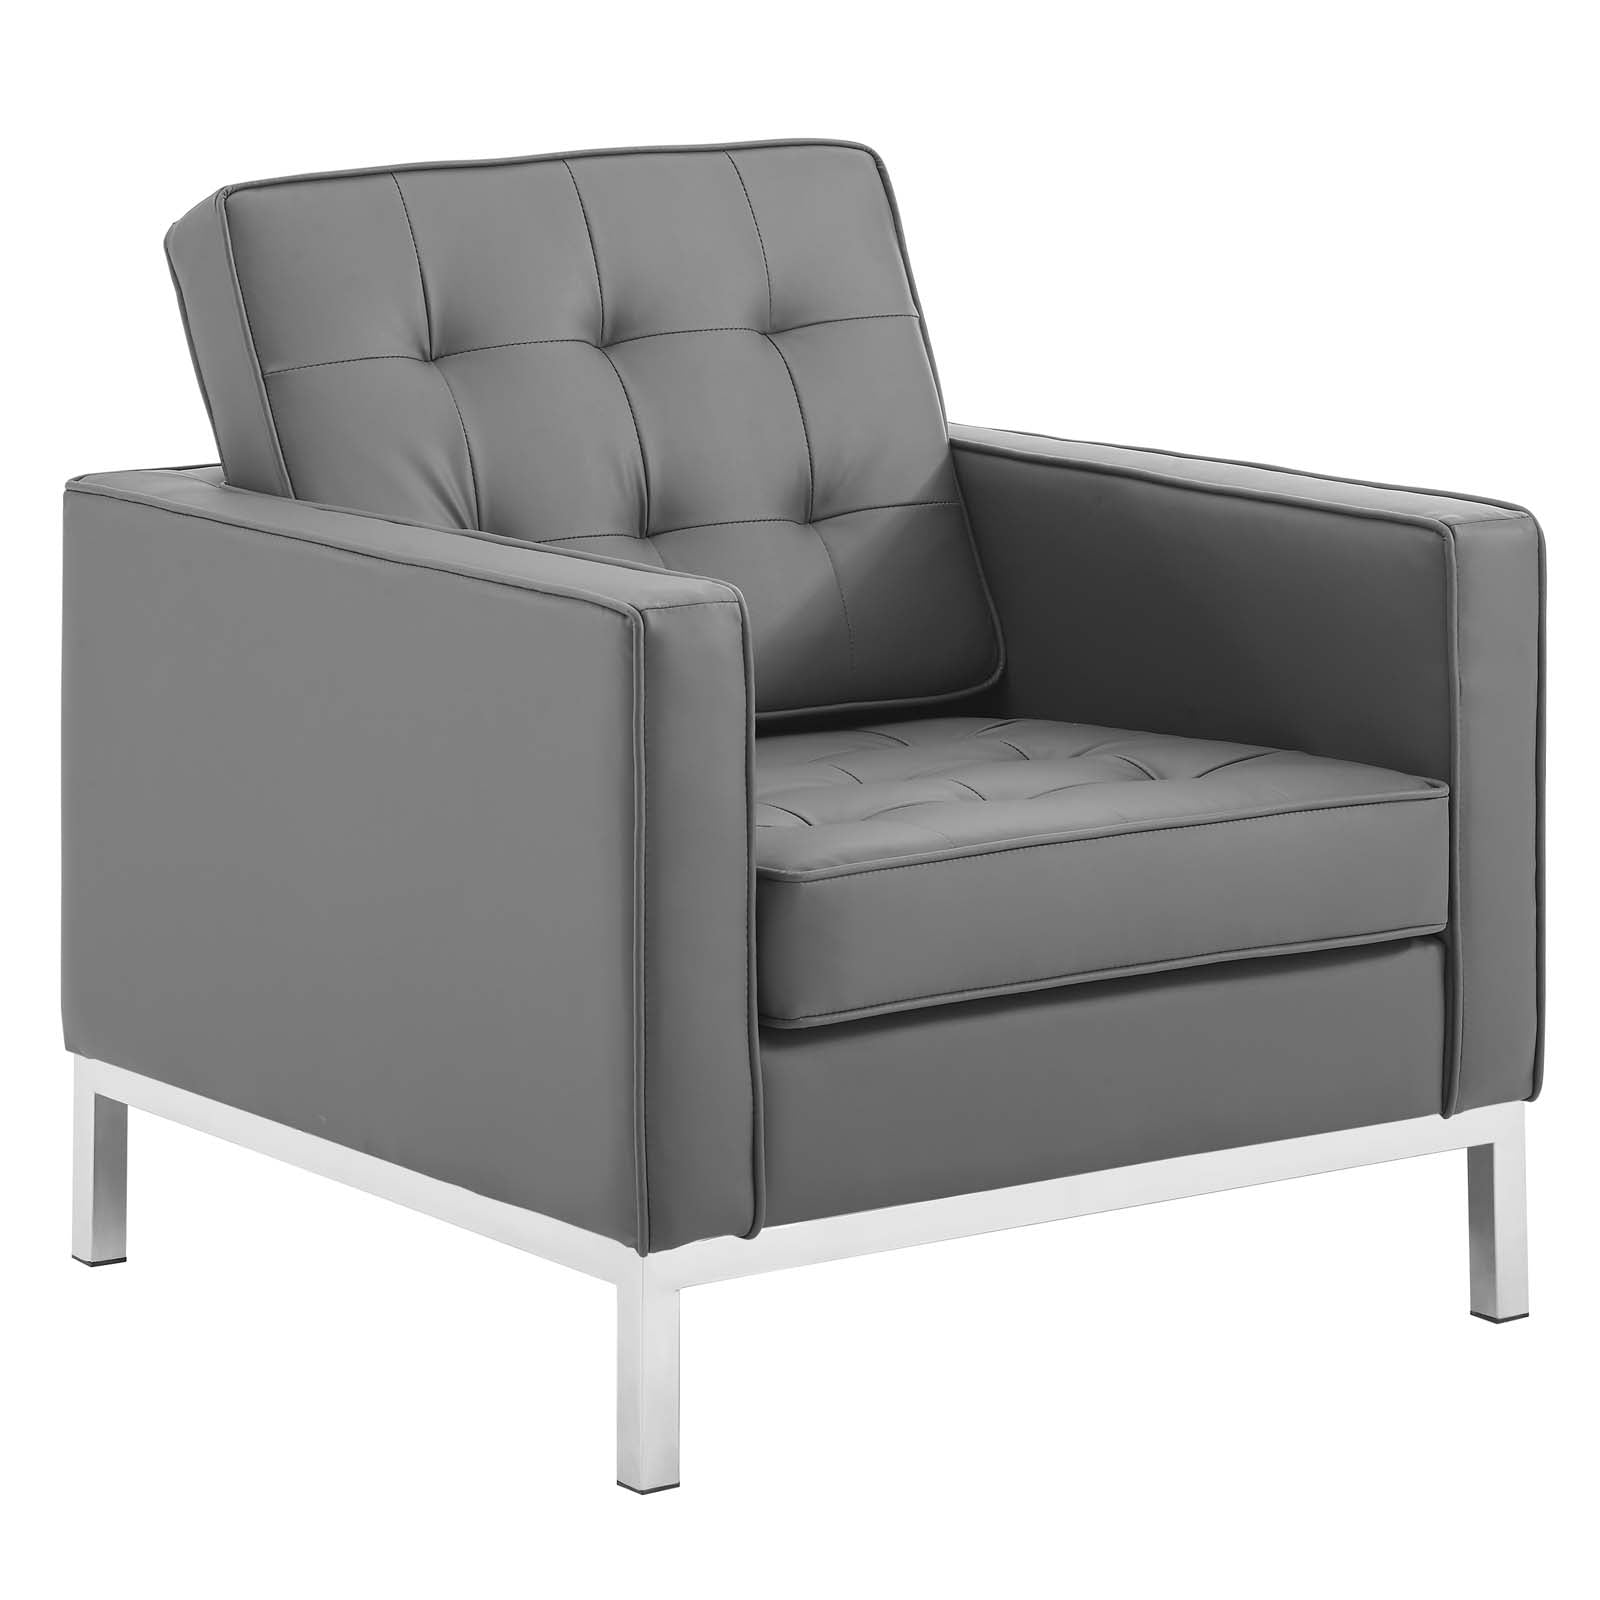 Modway Sofas & Couches - Loft-Tufted-Upholstered-Faux-Leather-Sofa-and-Armchair-Set-Silver-Gray